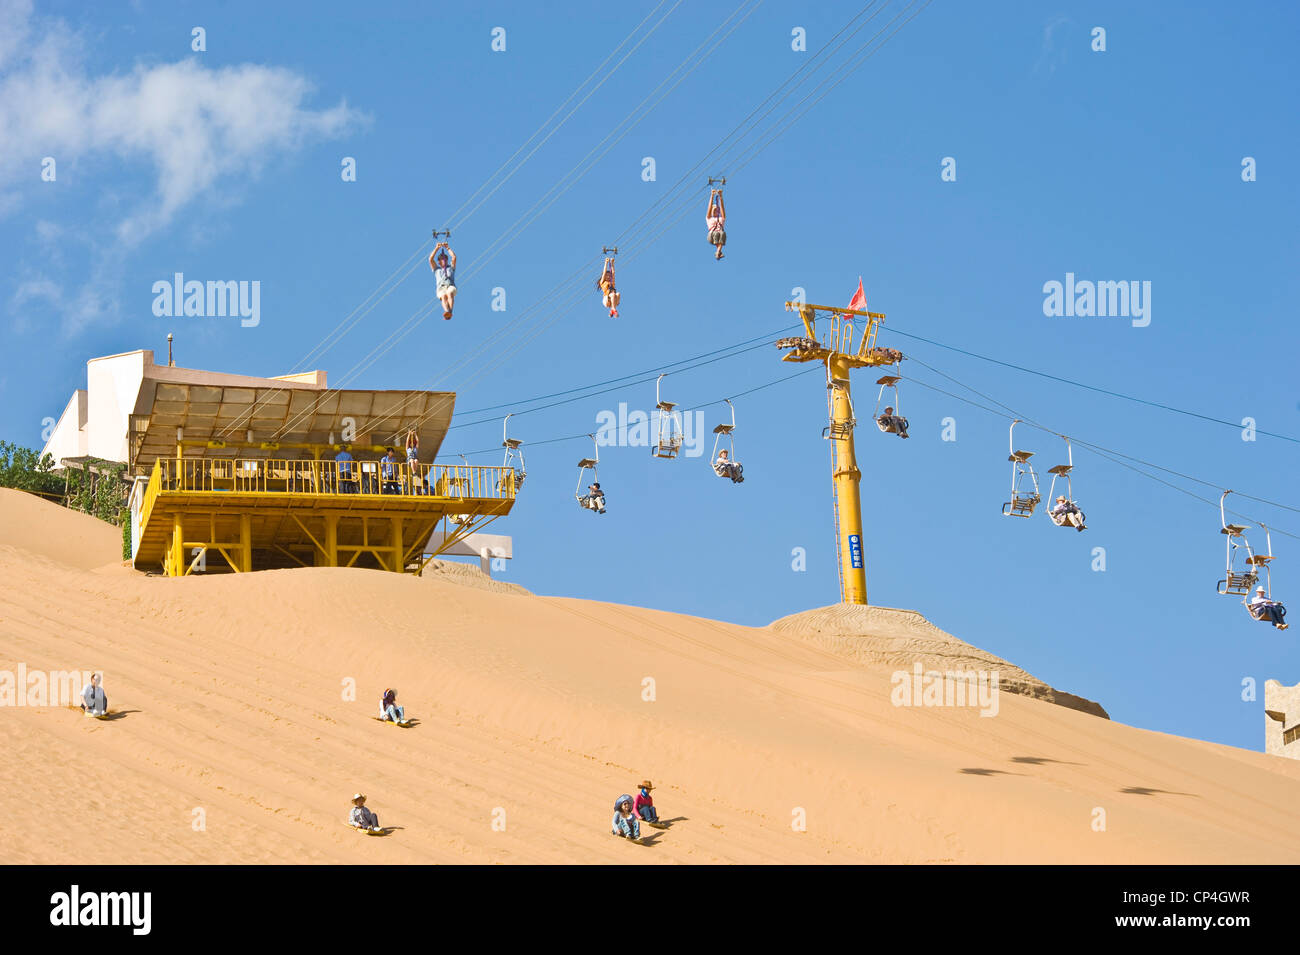 Tourists at the Shapatou Theme Park enjoy sand boarding and the zip wire rides. Stock Photo